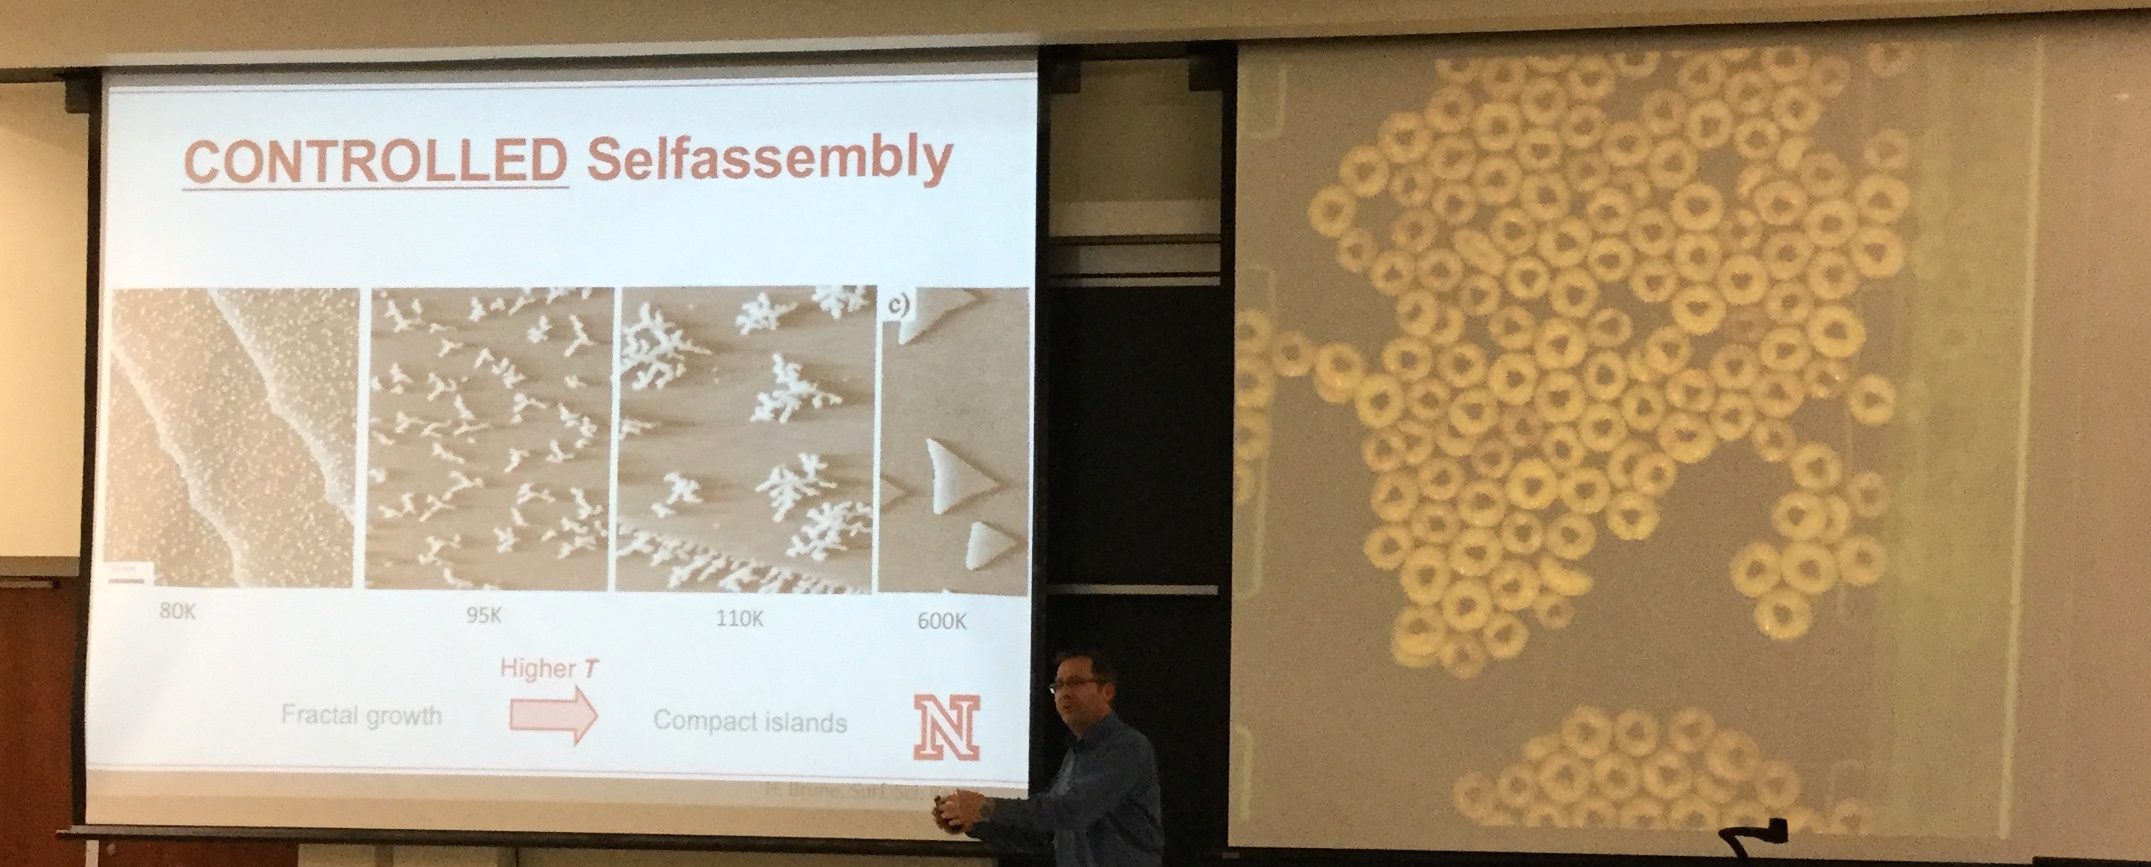 Fig. 4 (Click to enlarge). Dr. Enders demonstrates self-assembly in Cheerios (right) while presenting scanning tunneling microscopy (STM) images showing the self-assembly of silver atoms on a platinum substrate at various temperatures (left). (Click to enlarge.)